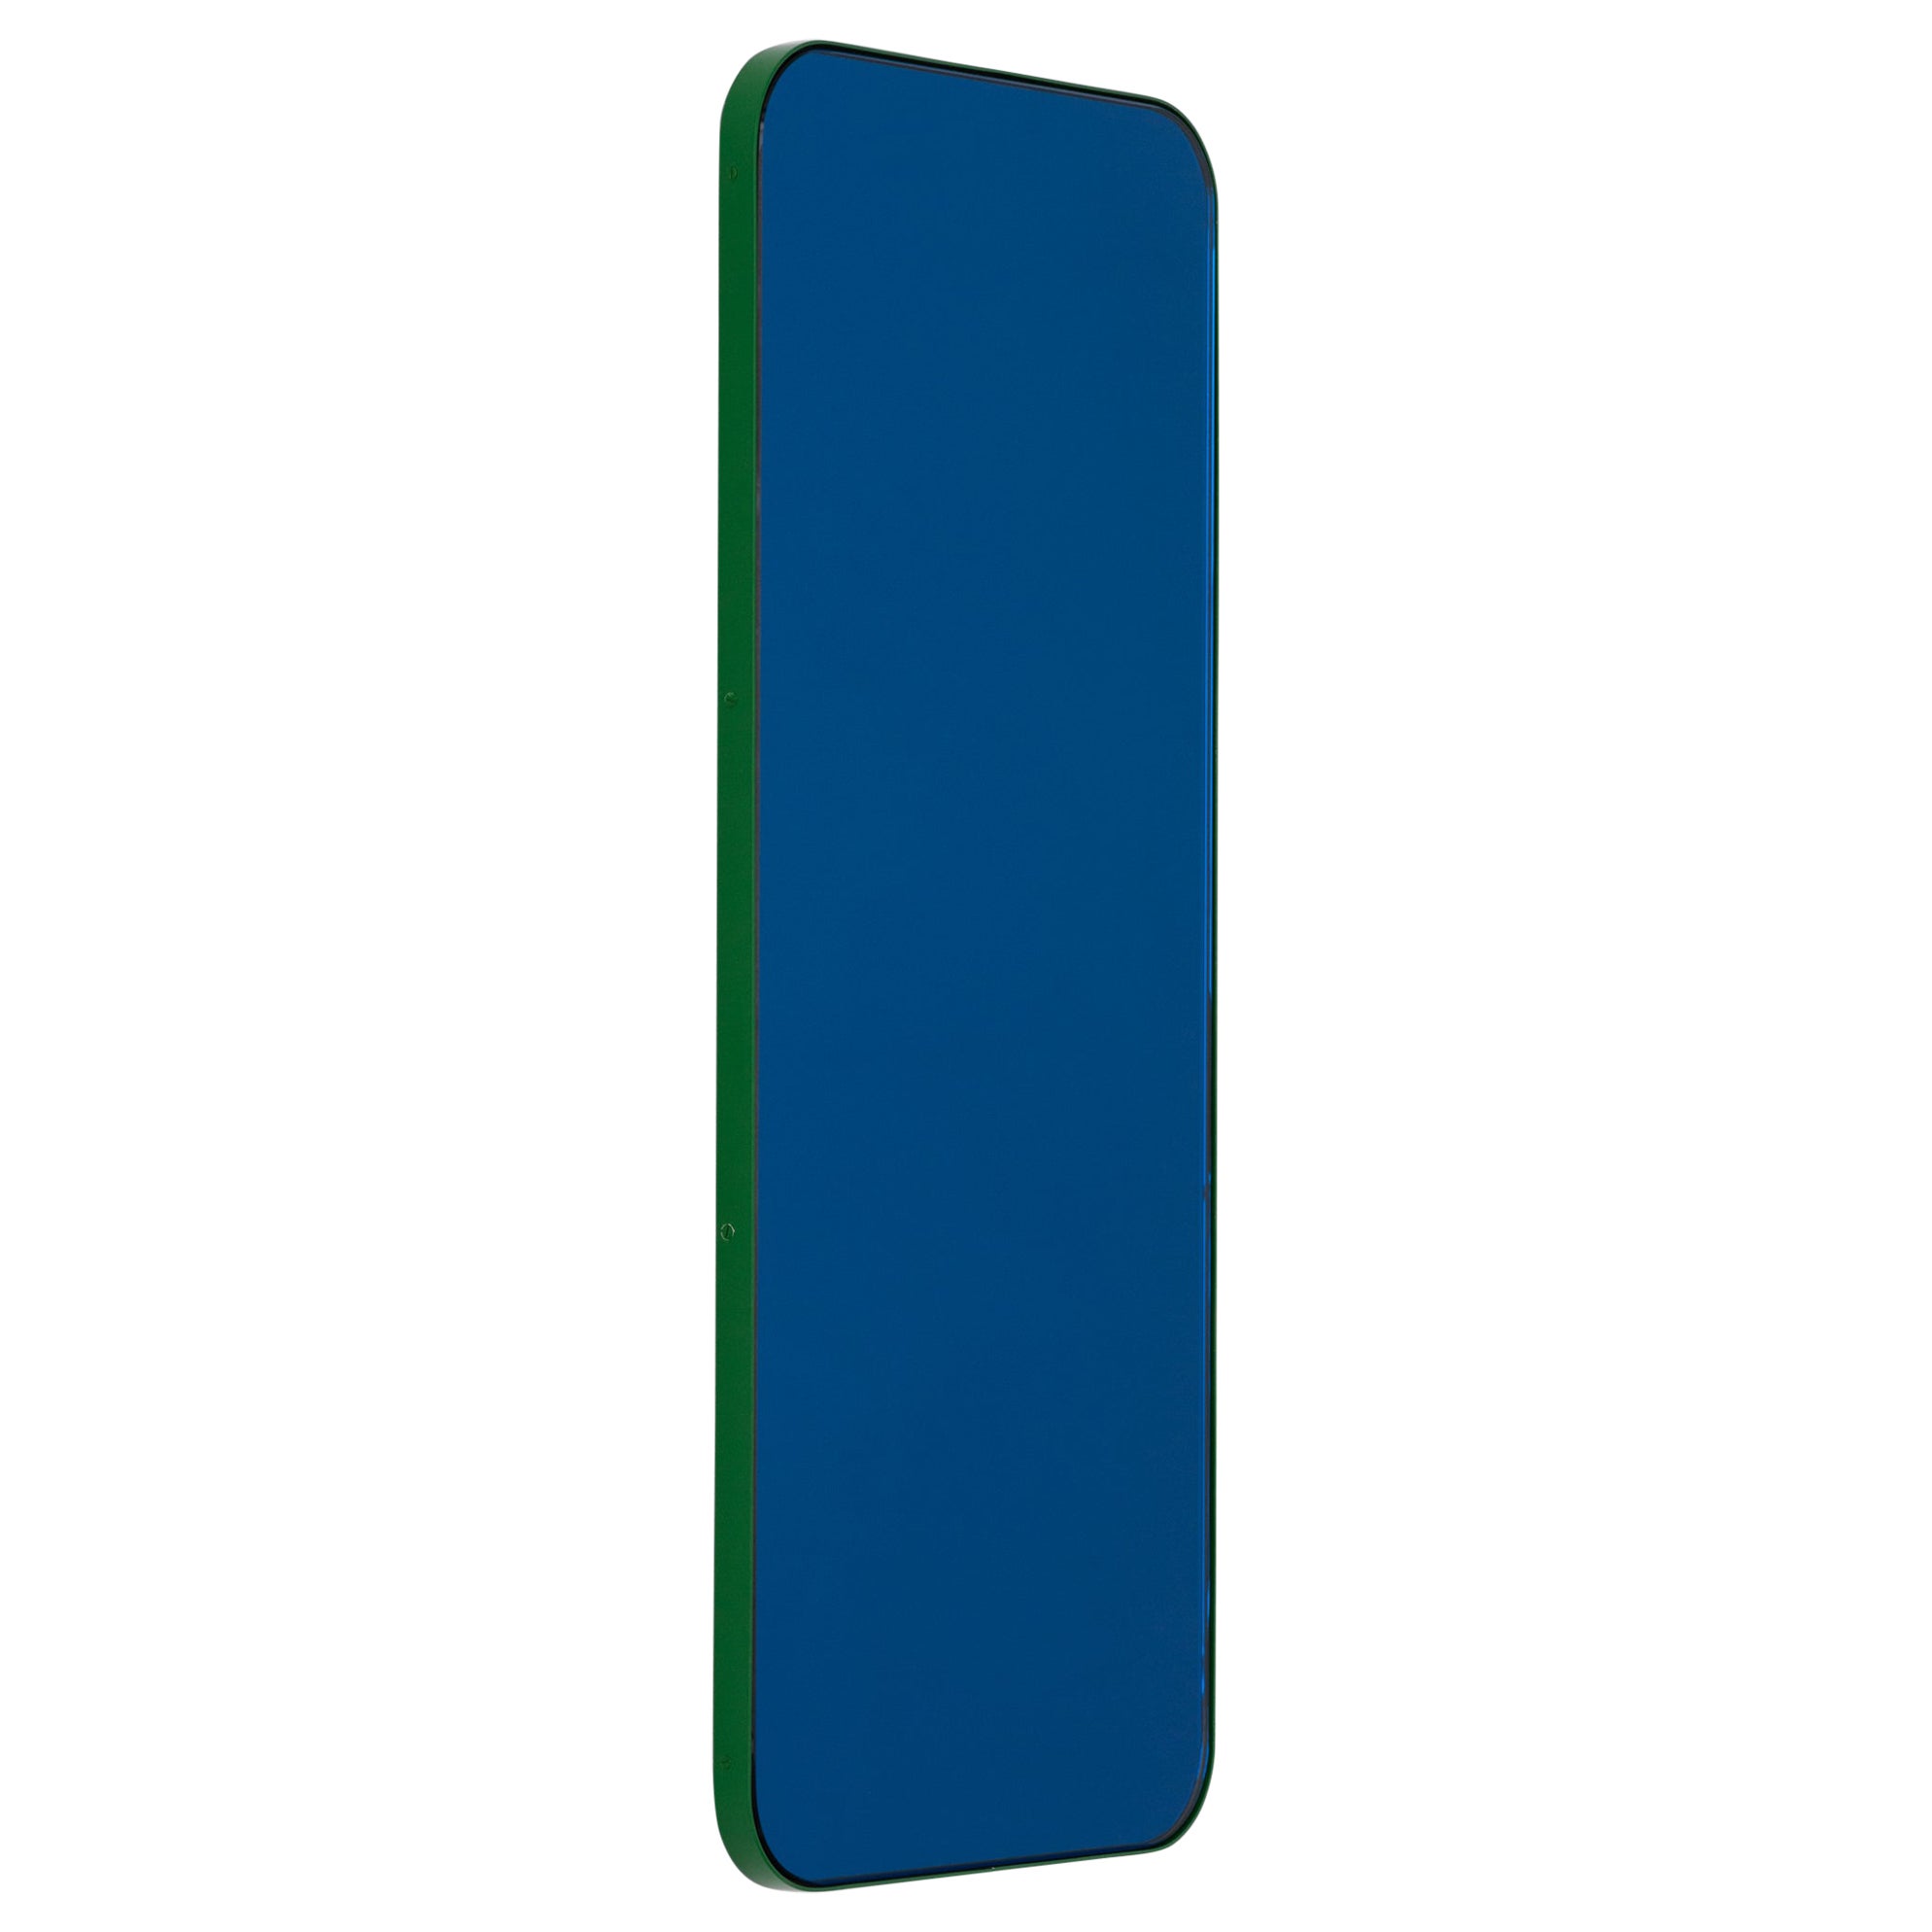 Quadris Rectangular Contemporary Blue Mirror with a Modern Green Frame, Large For Sale